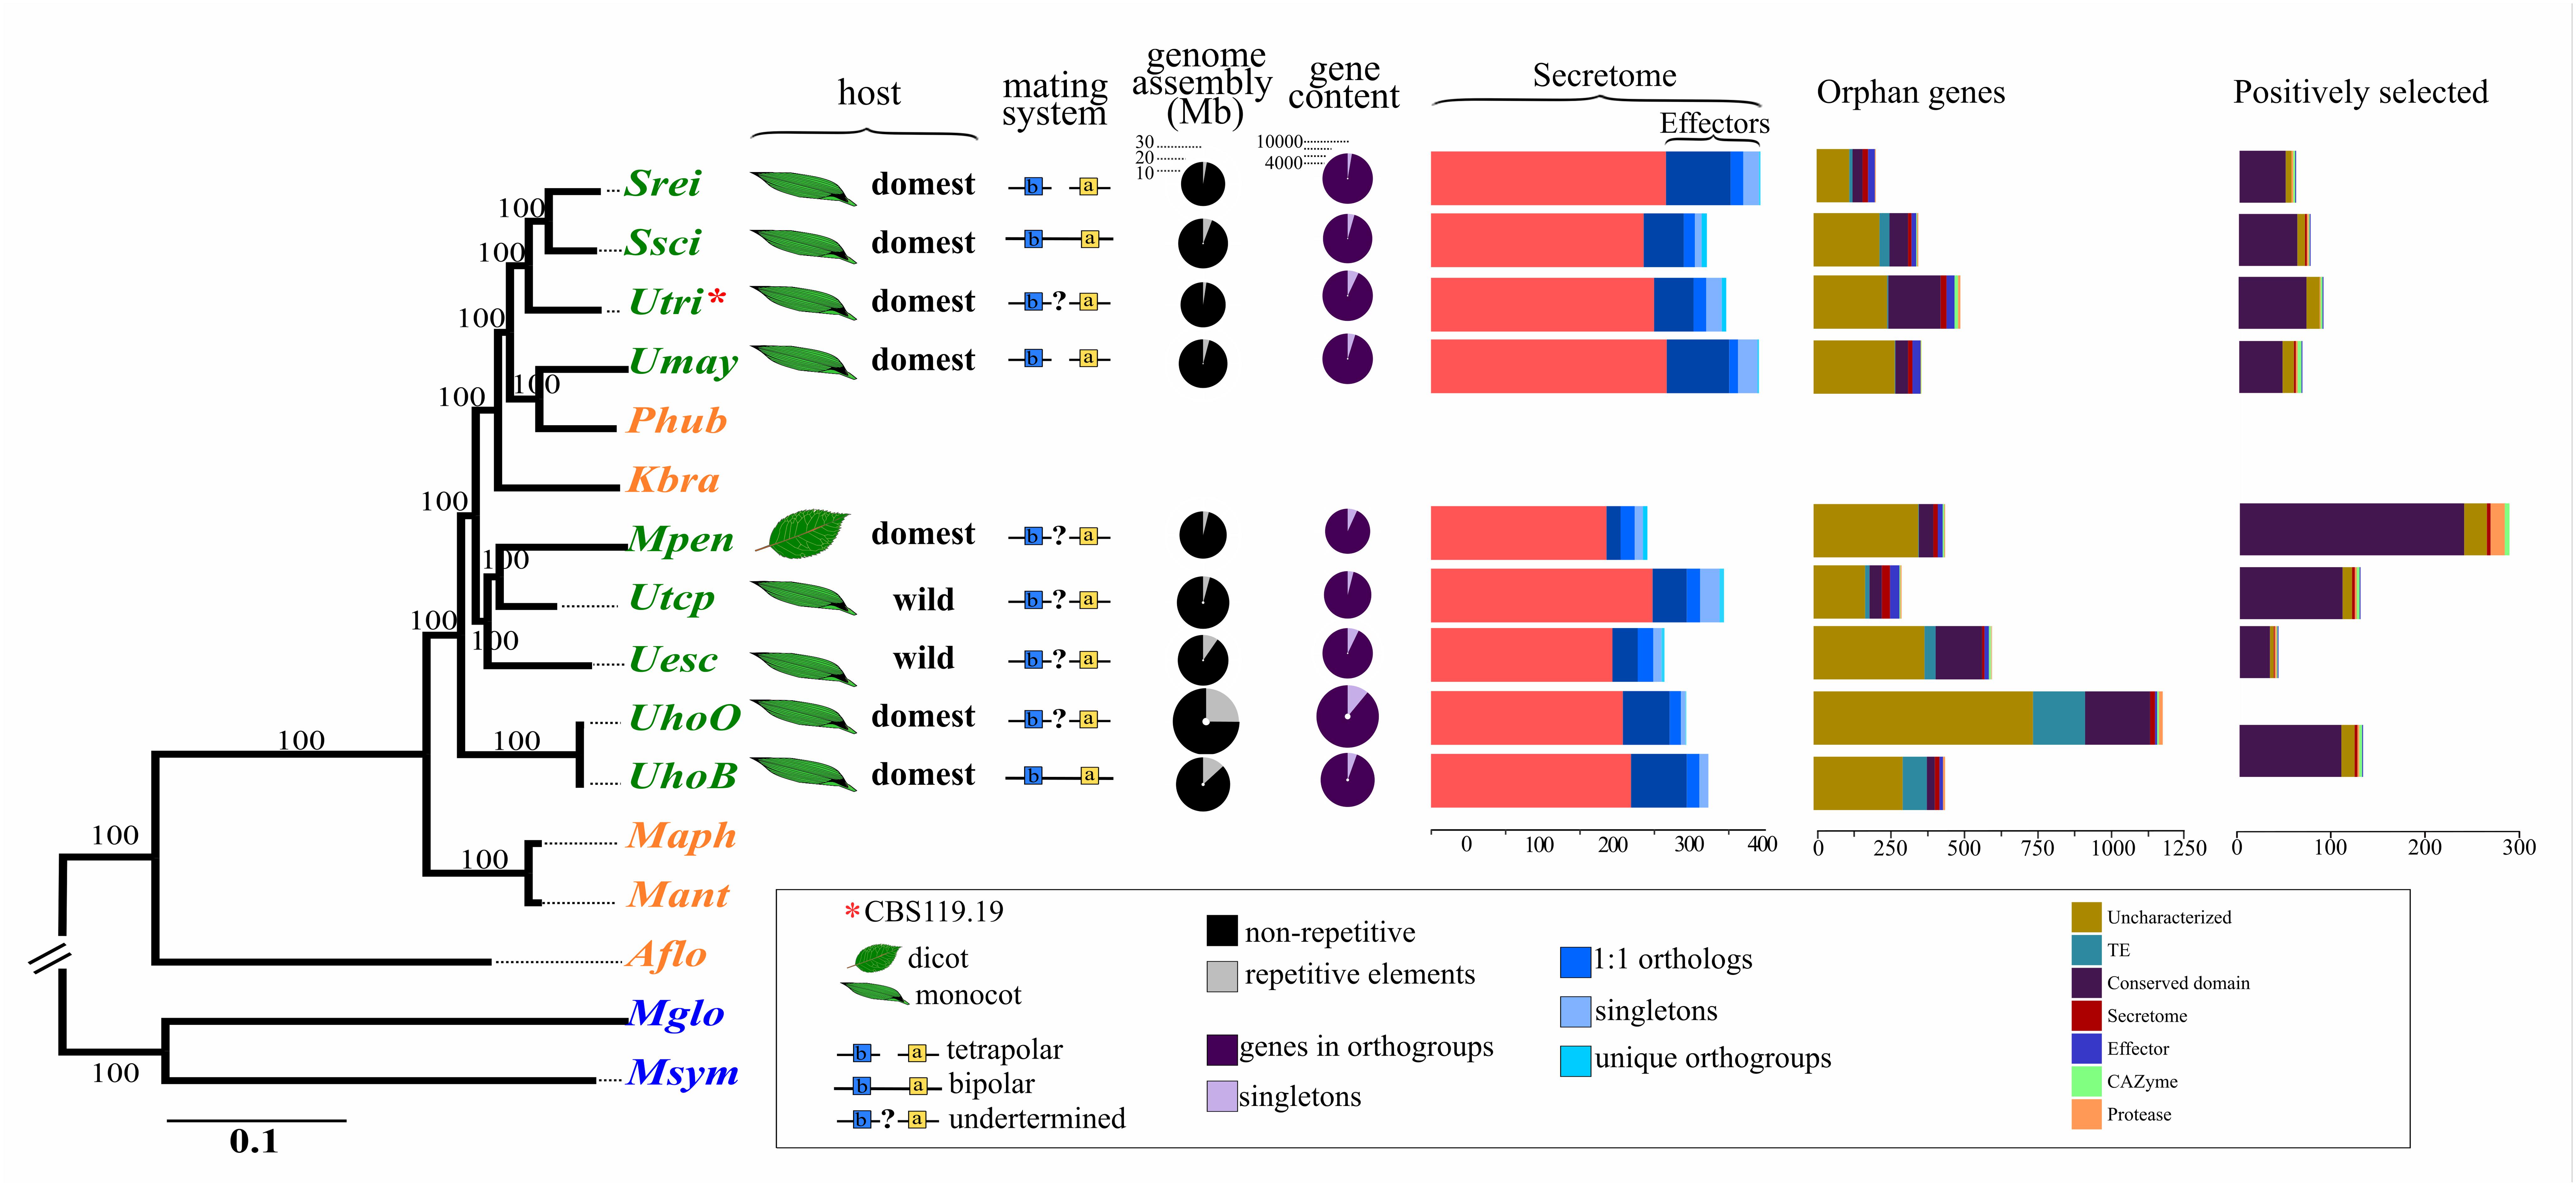 Comparative Genomics of Smut Pathogens: Insights From Orphans and Positively Selected Genes Into Host Specialization